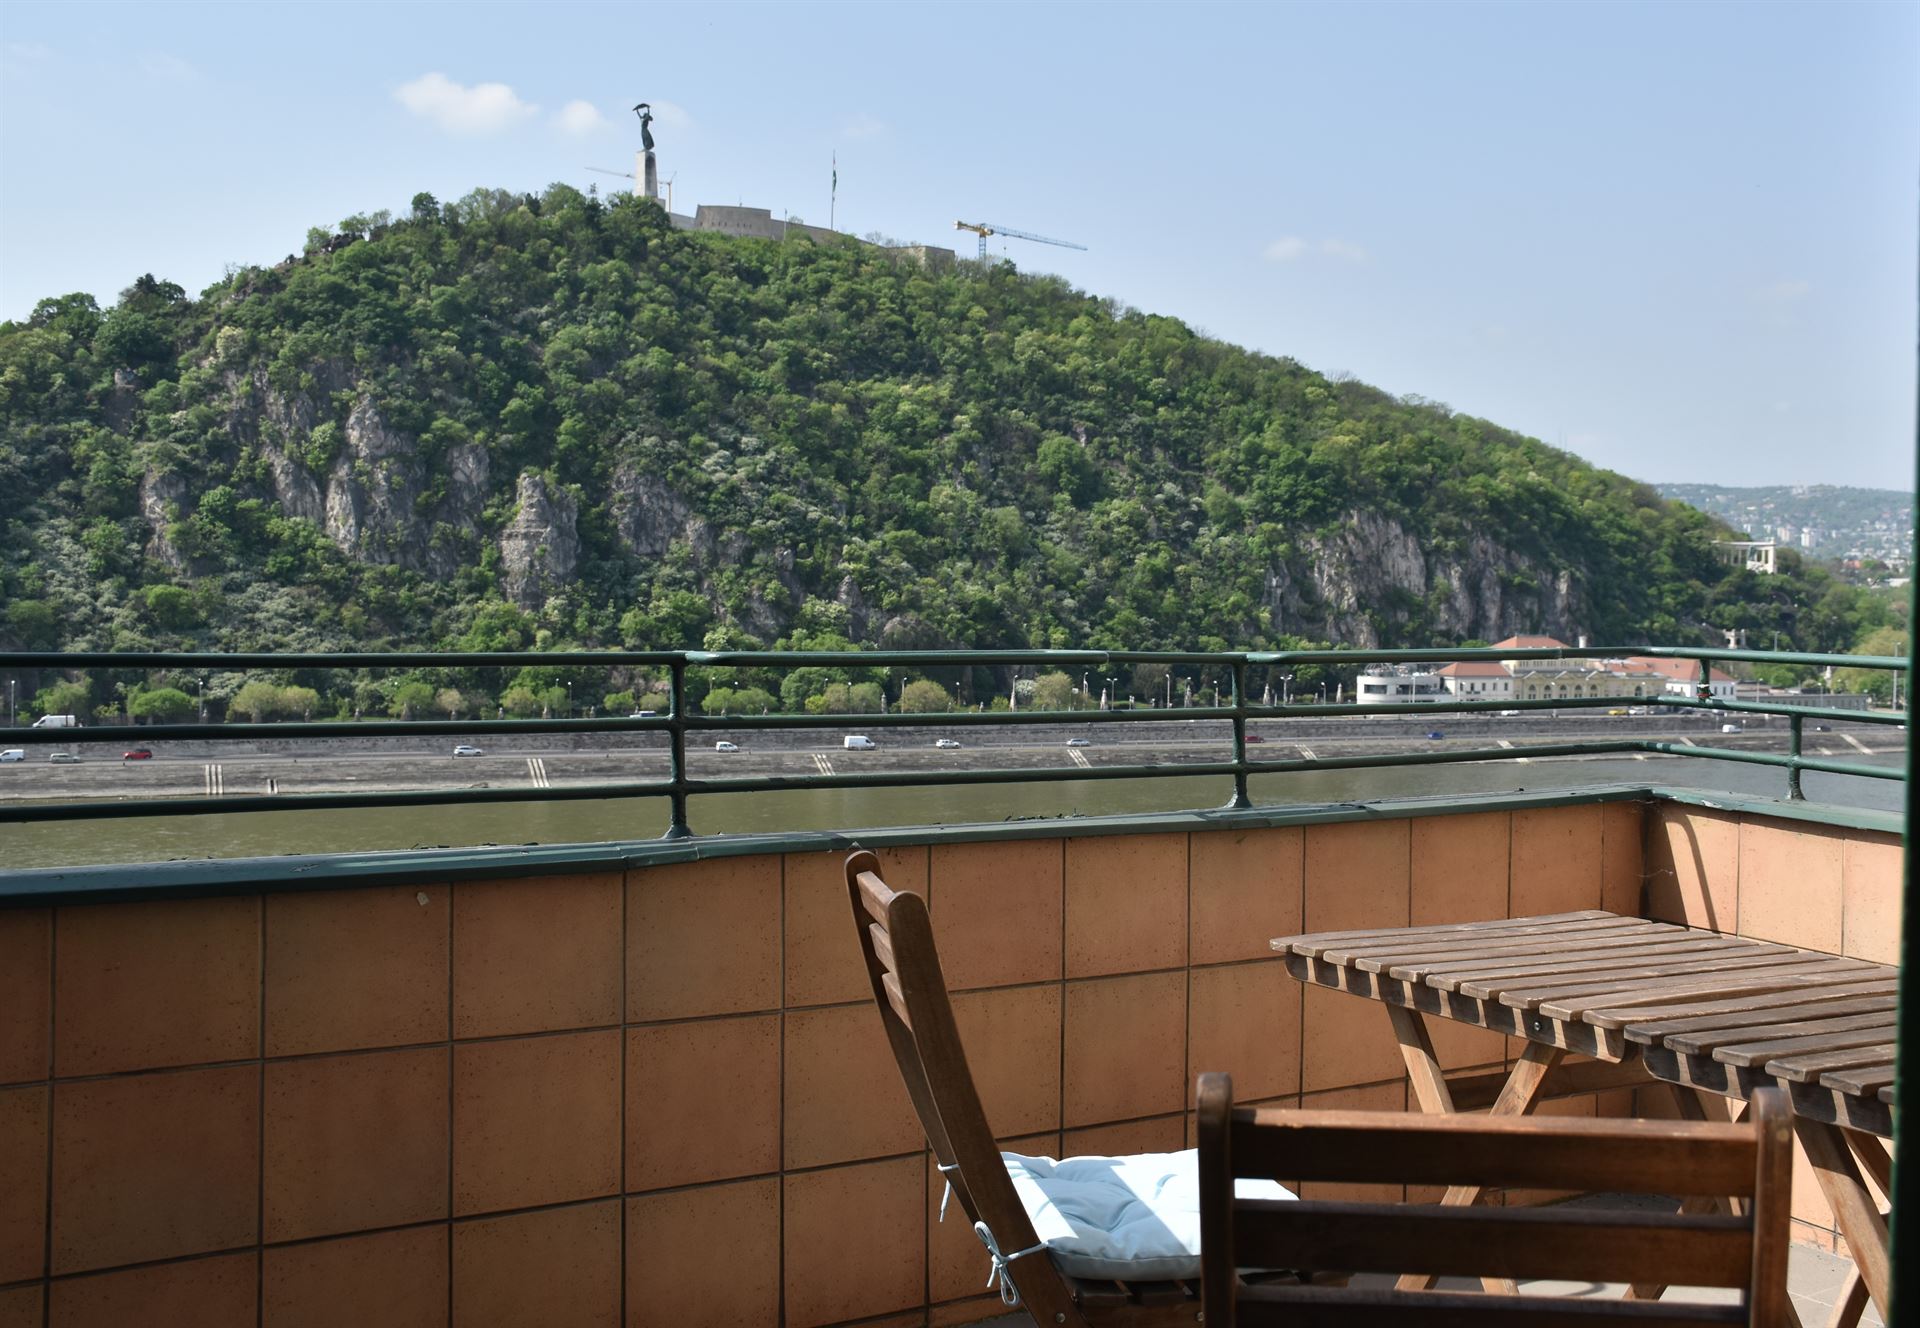 budapest-rental-danube-view-property-for-rent-long-term-lease-panorama-buda-hill-liberty-statue11